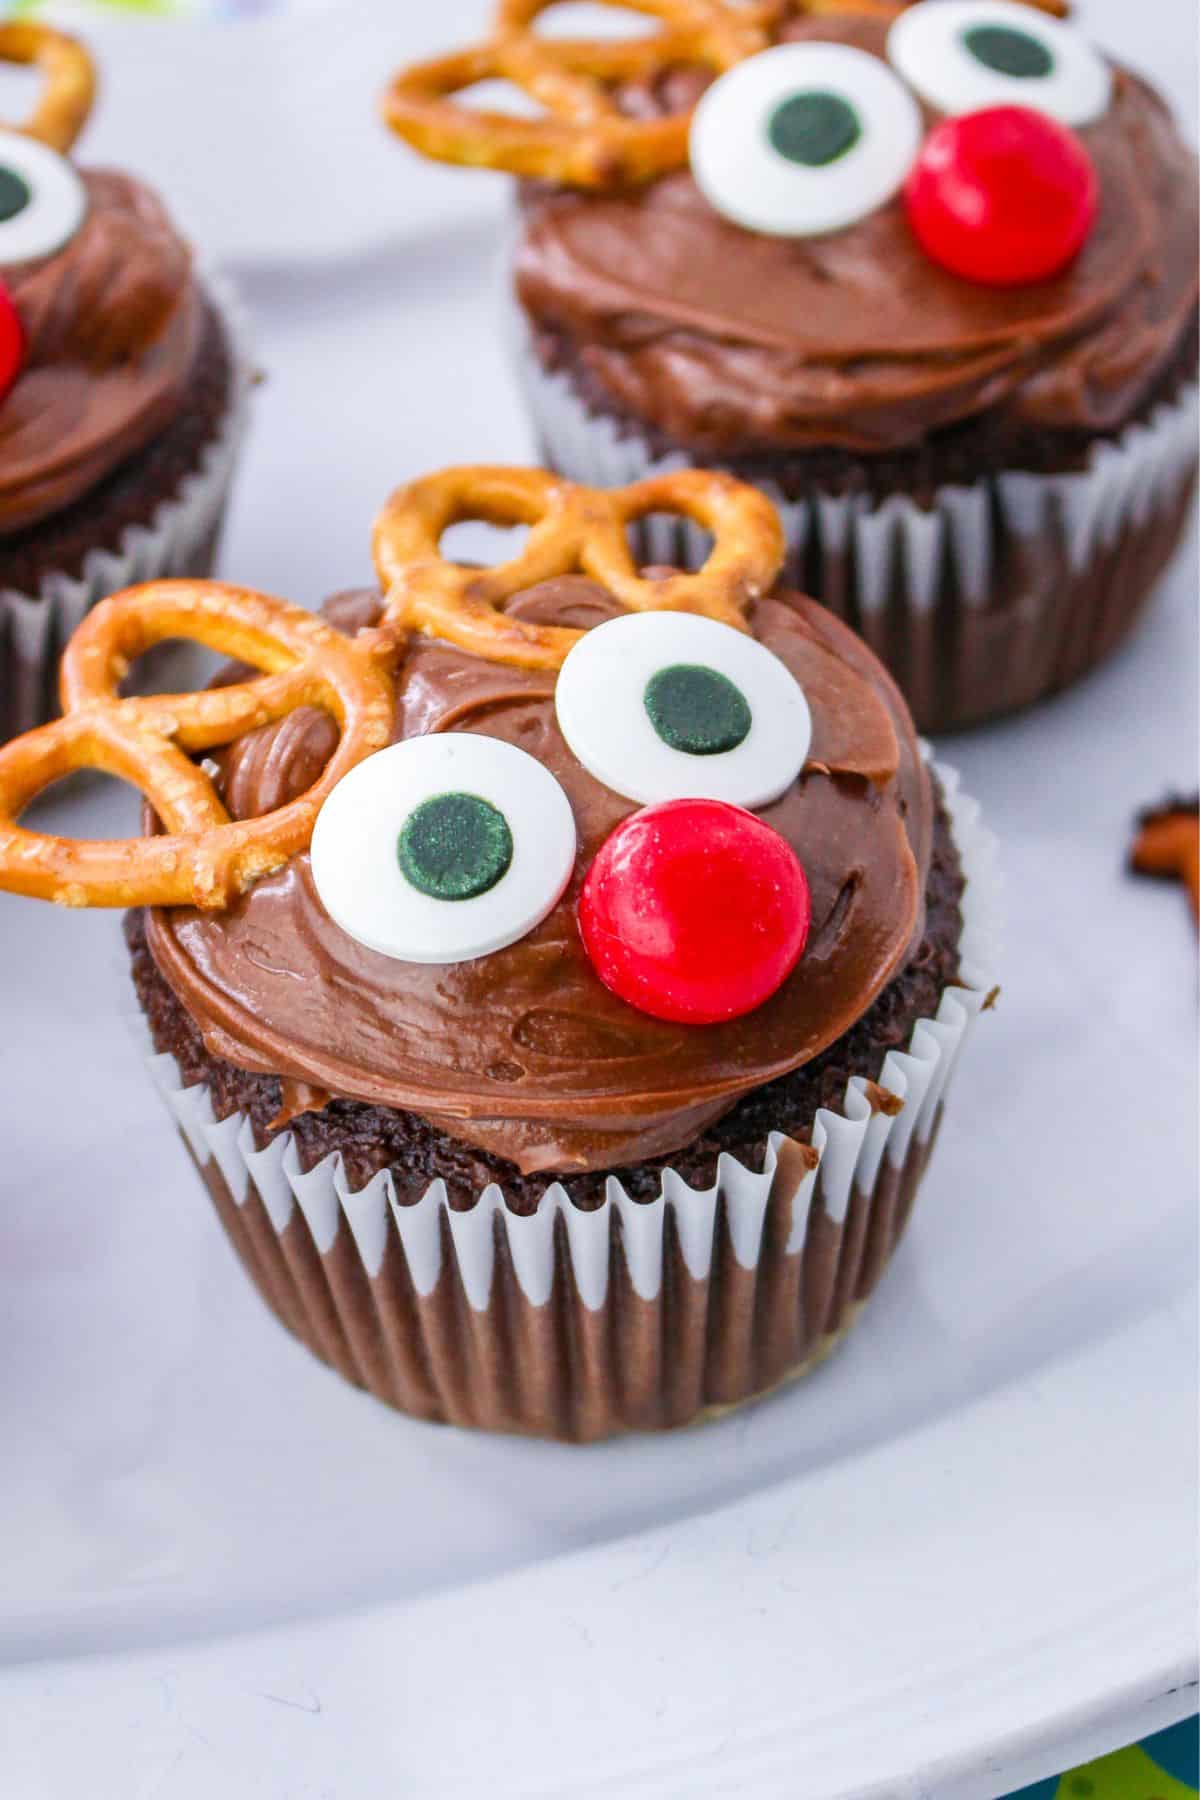 Chocolate reindeer cupcakes with pretzel antlers on a white plate.